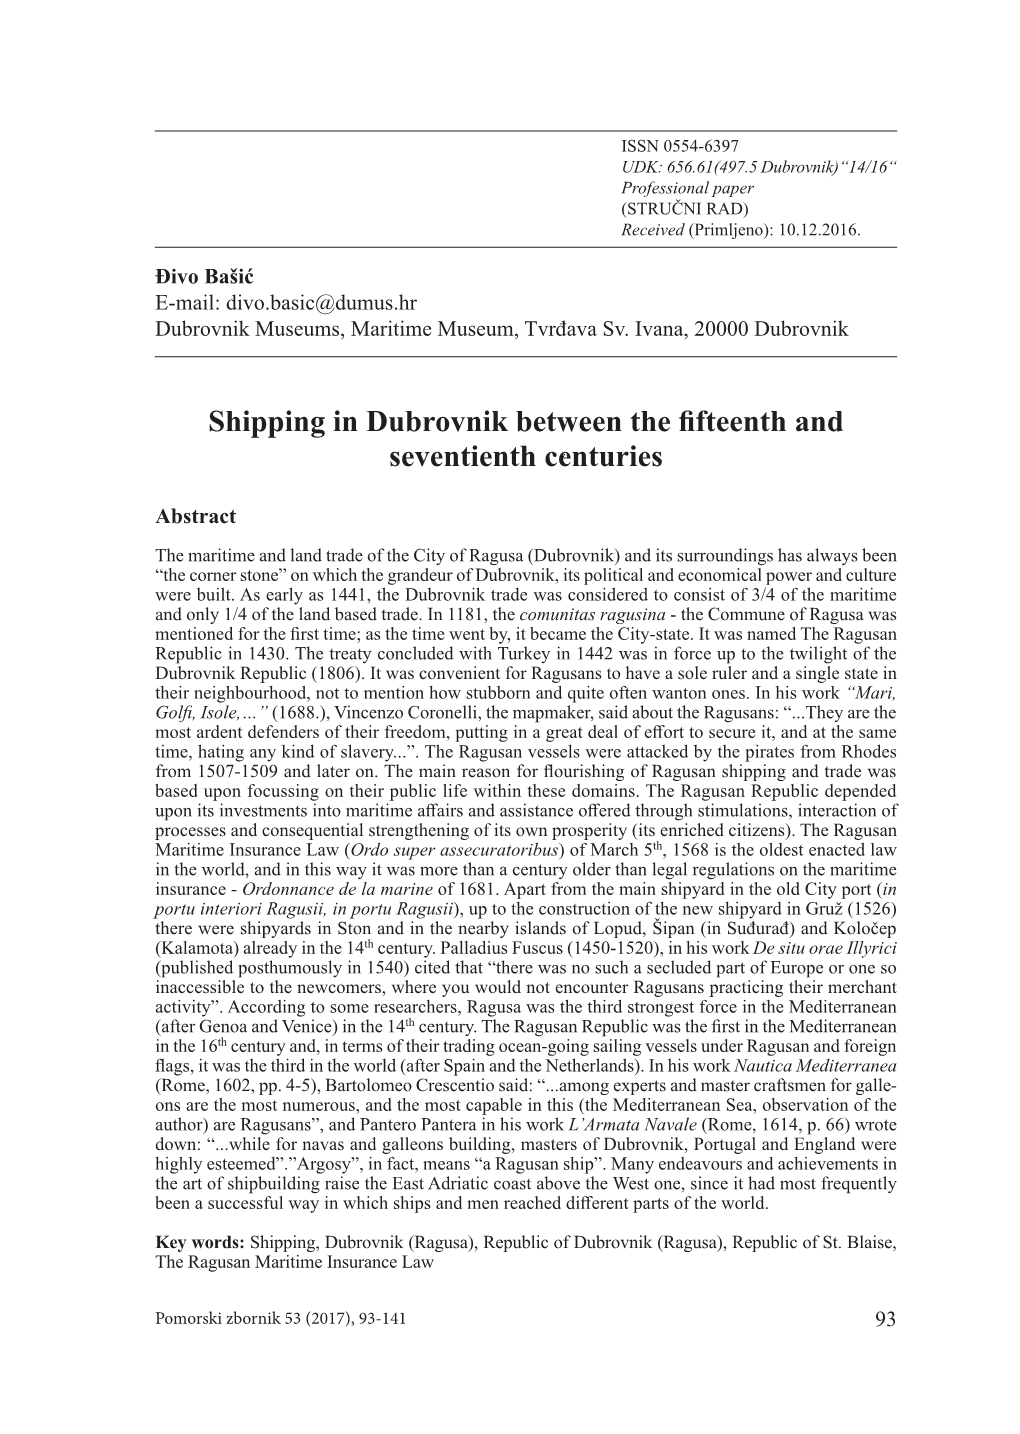 Shipping in Dubrovnik Between the Fifteenth and Seventienth Centuries